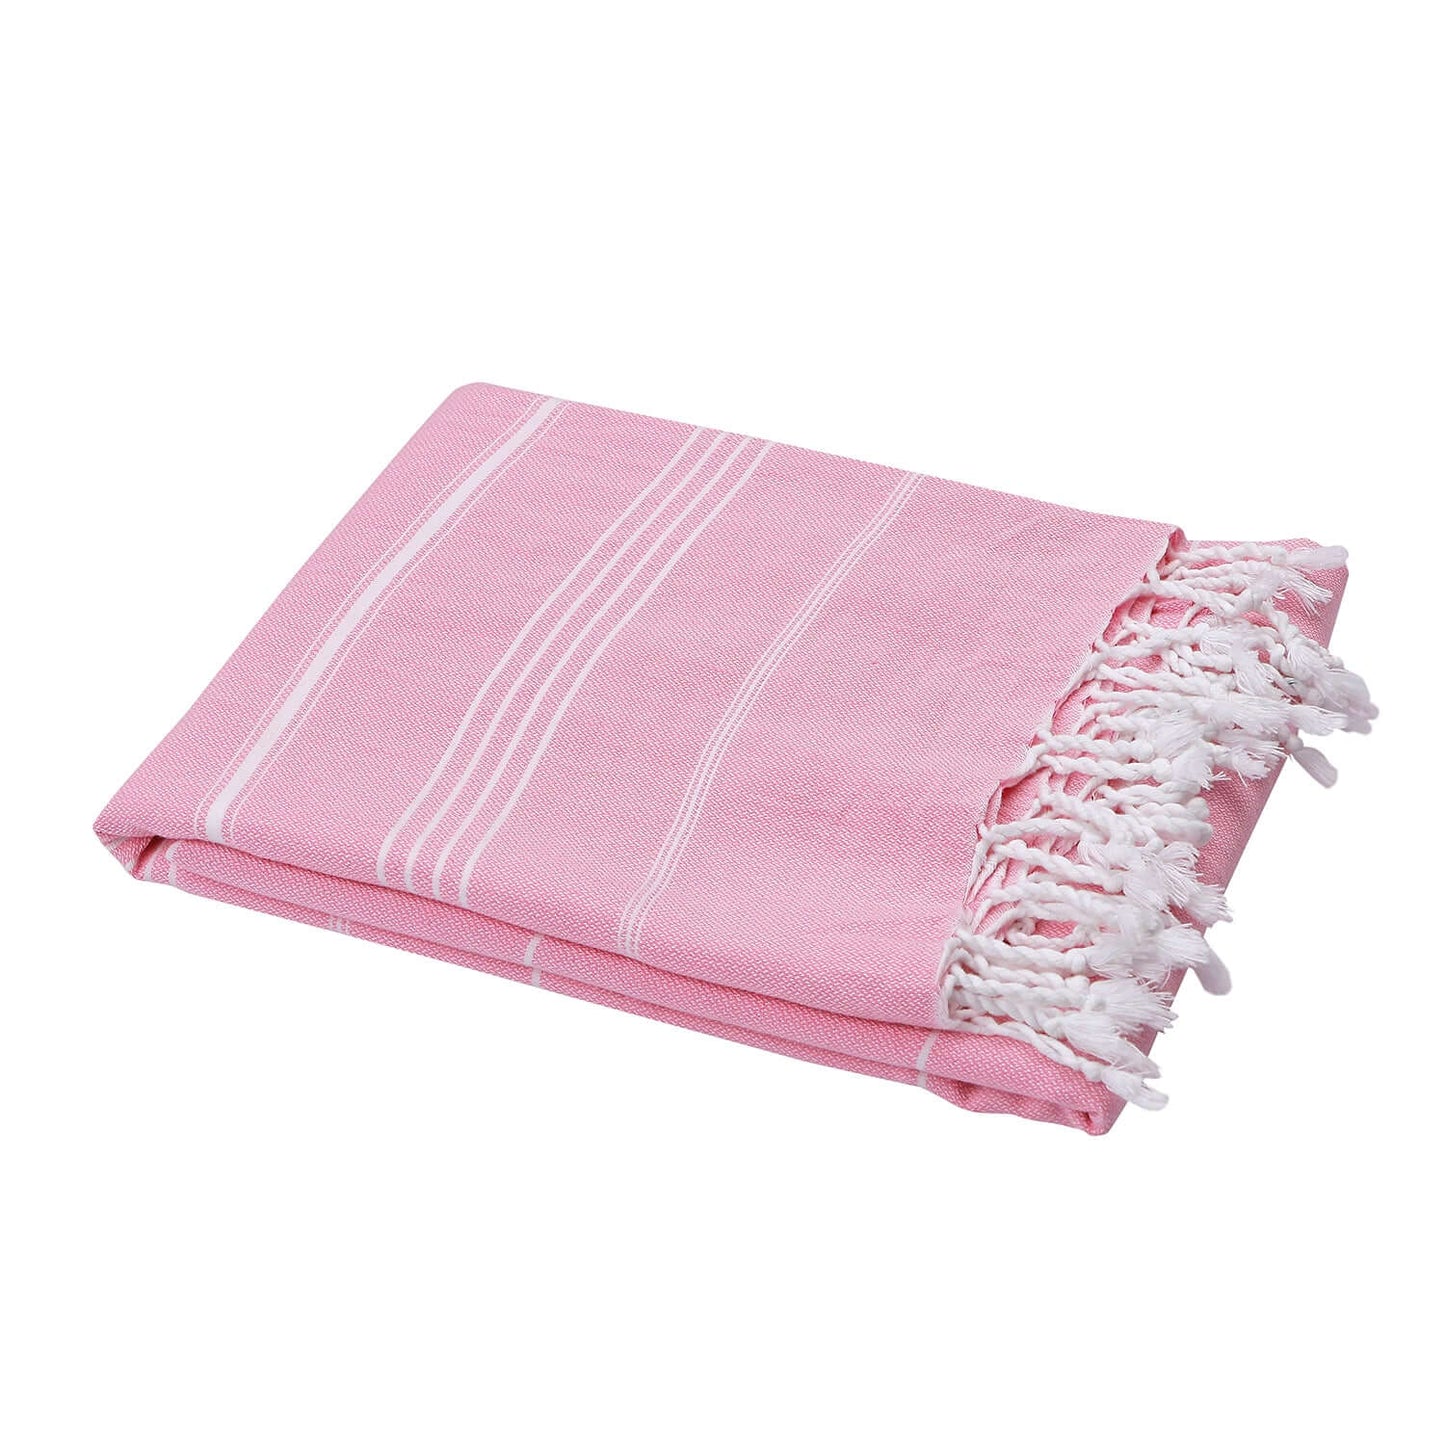 Folded Loom Legacy pink beach towel with subtle white vertical stripes. The towel features fringed white tassels on its edge, all displayed against a white background.